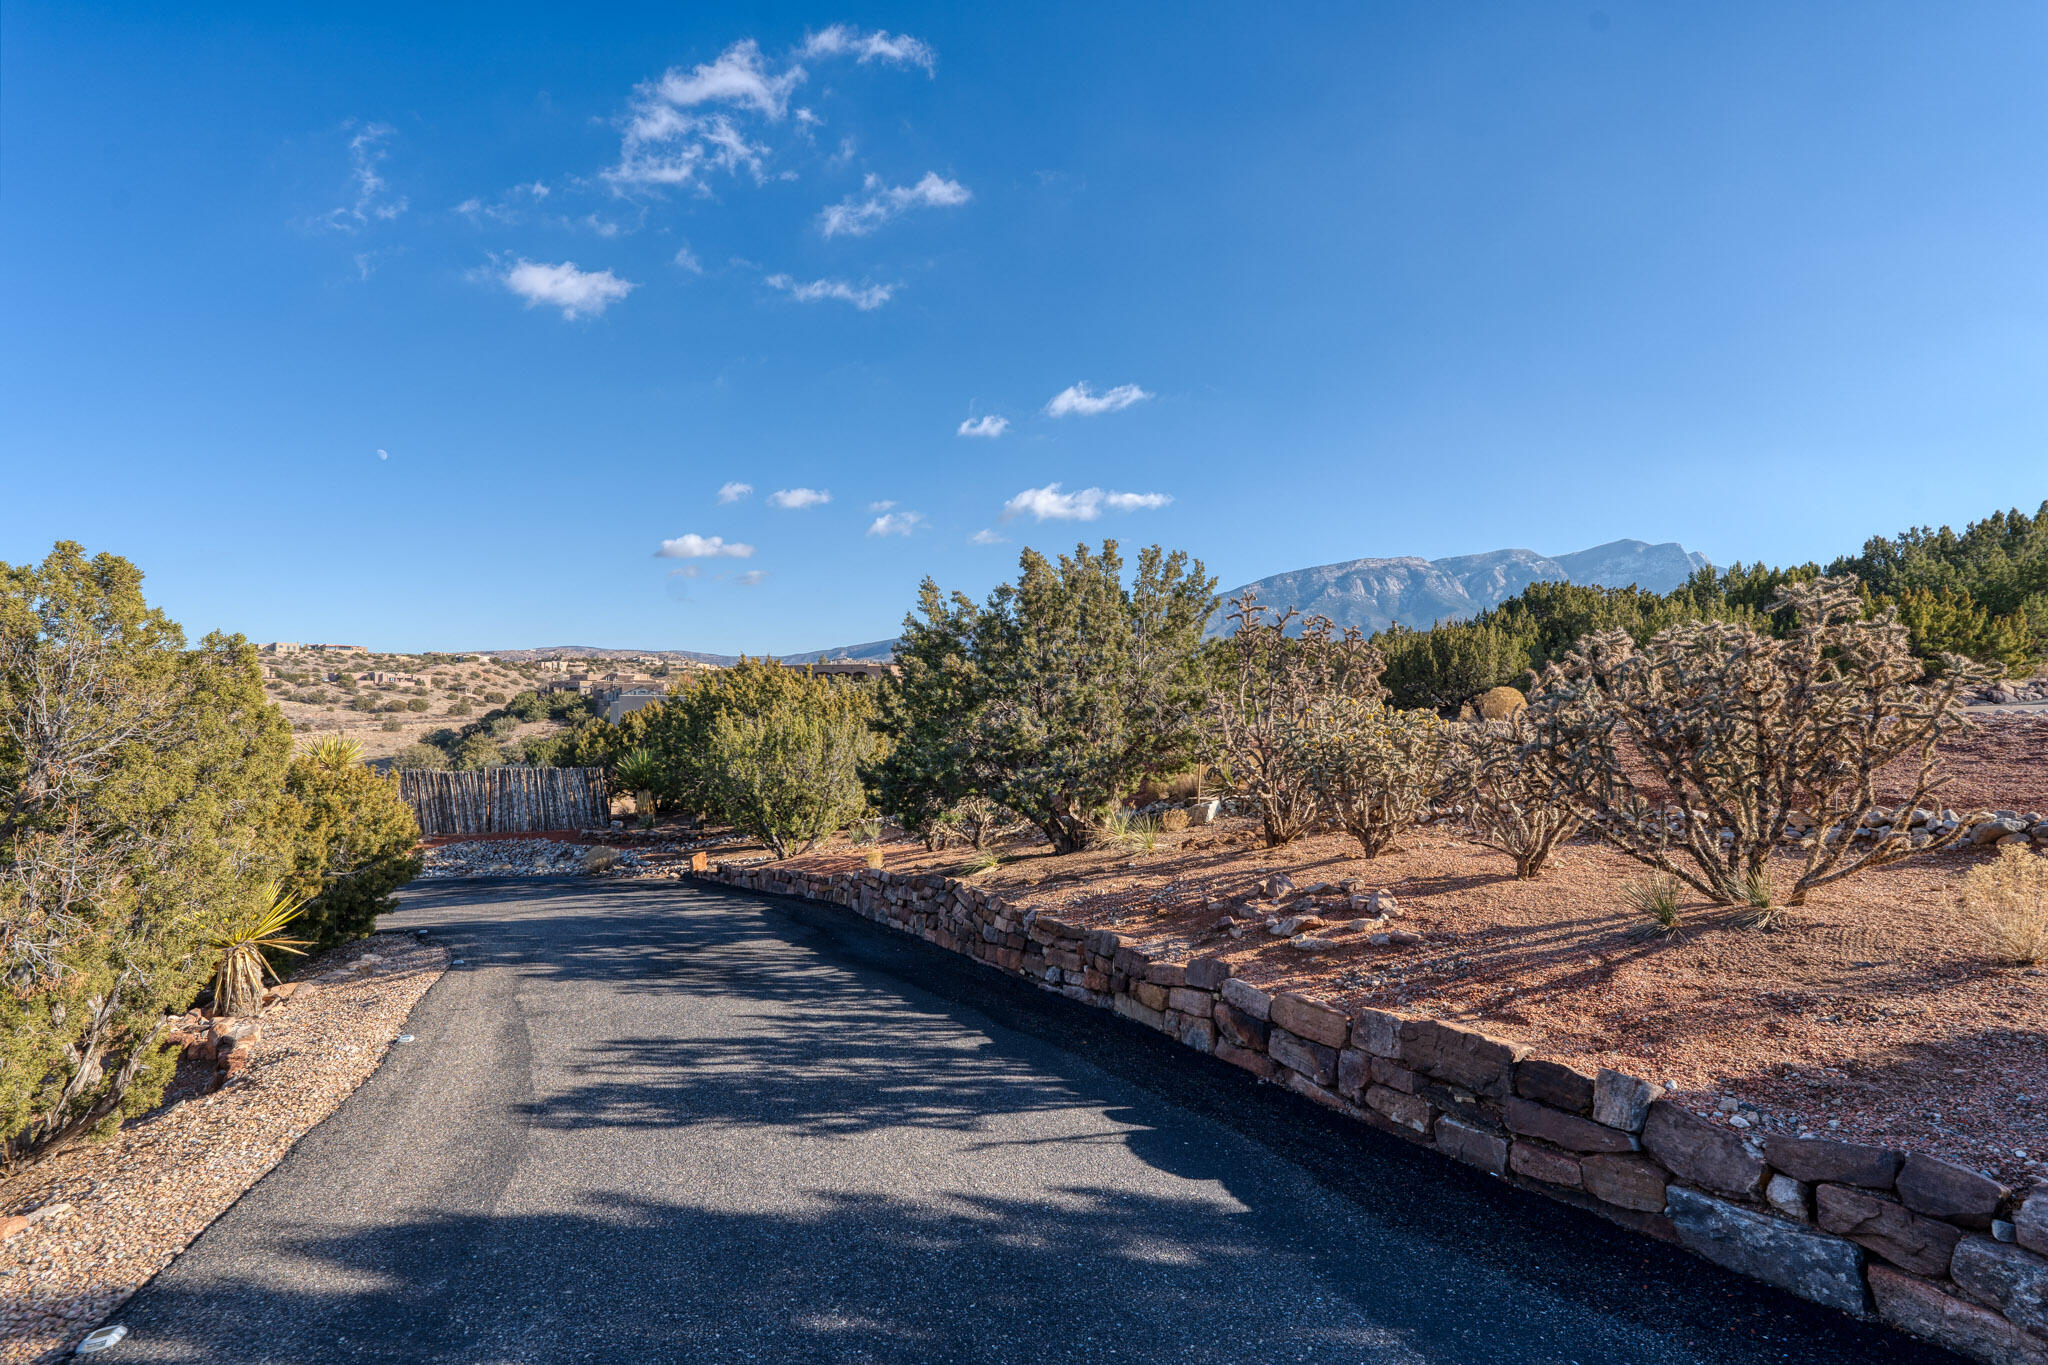 4 Tiwa Trail, Placitas, New Mexico 87043, 4 Bedrooms Bedrooms, ,3 BathroomsBathrooms,Residential,For Sale,4 Tiwa Trail,1054656